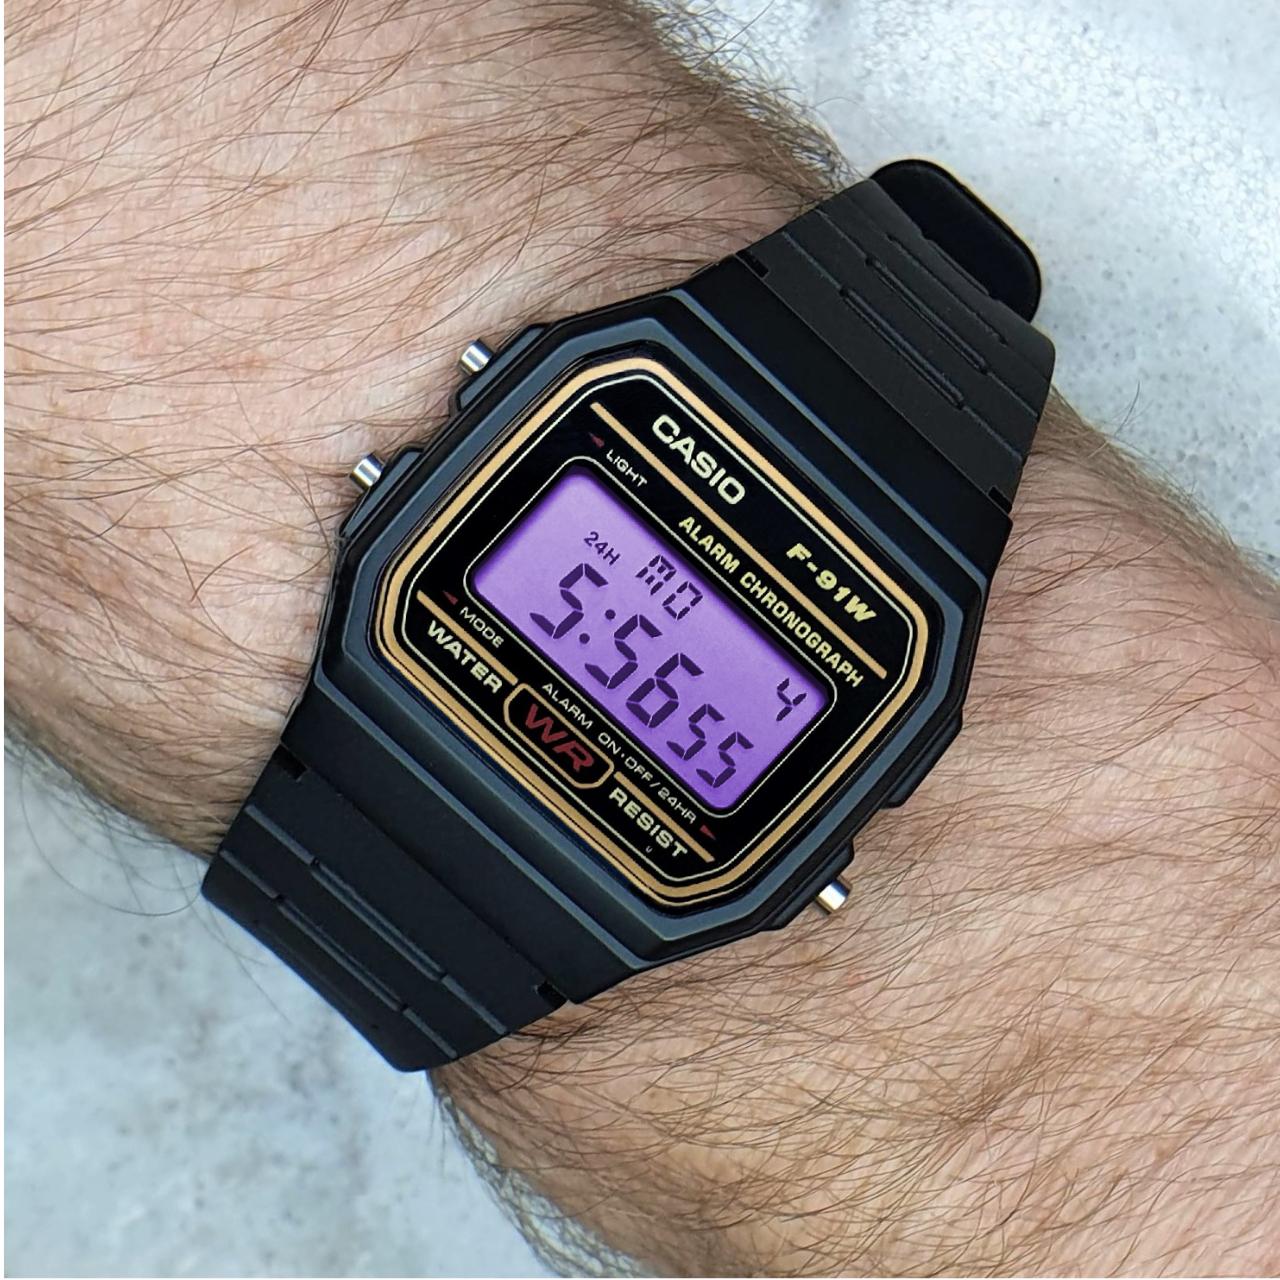 Is it possible to make the classic Casio F91 watch - Depop